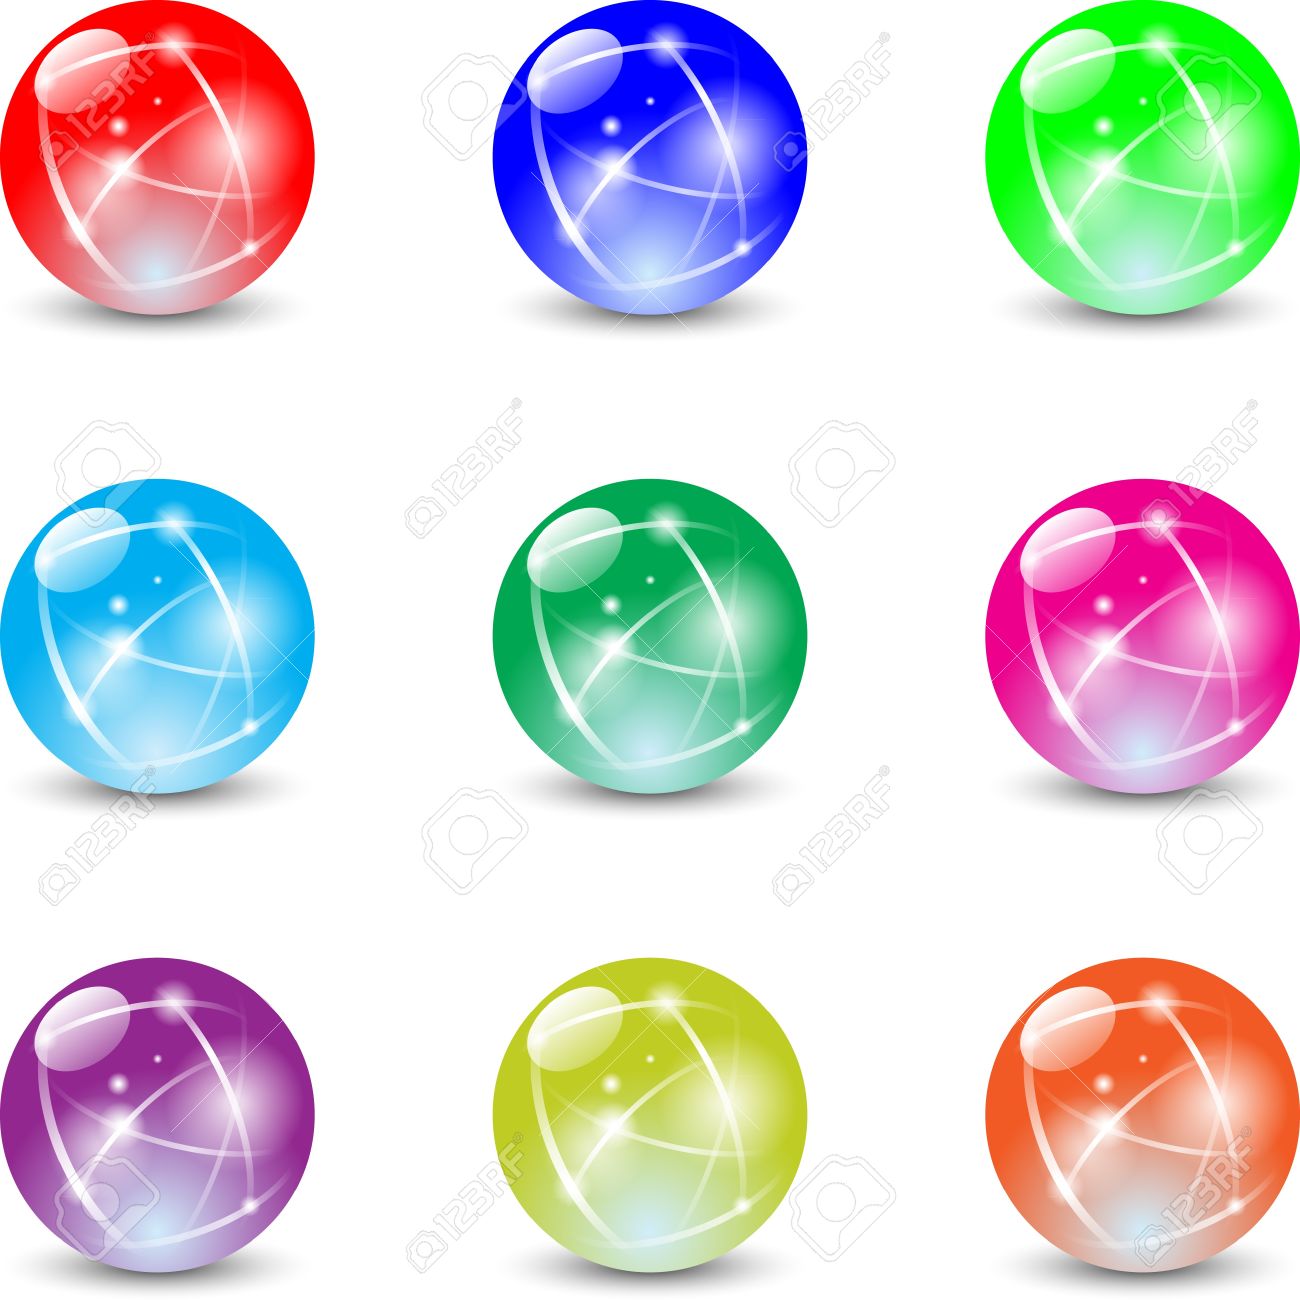 play marbles clipart - photo #23